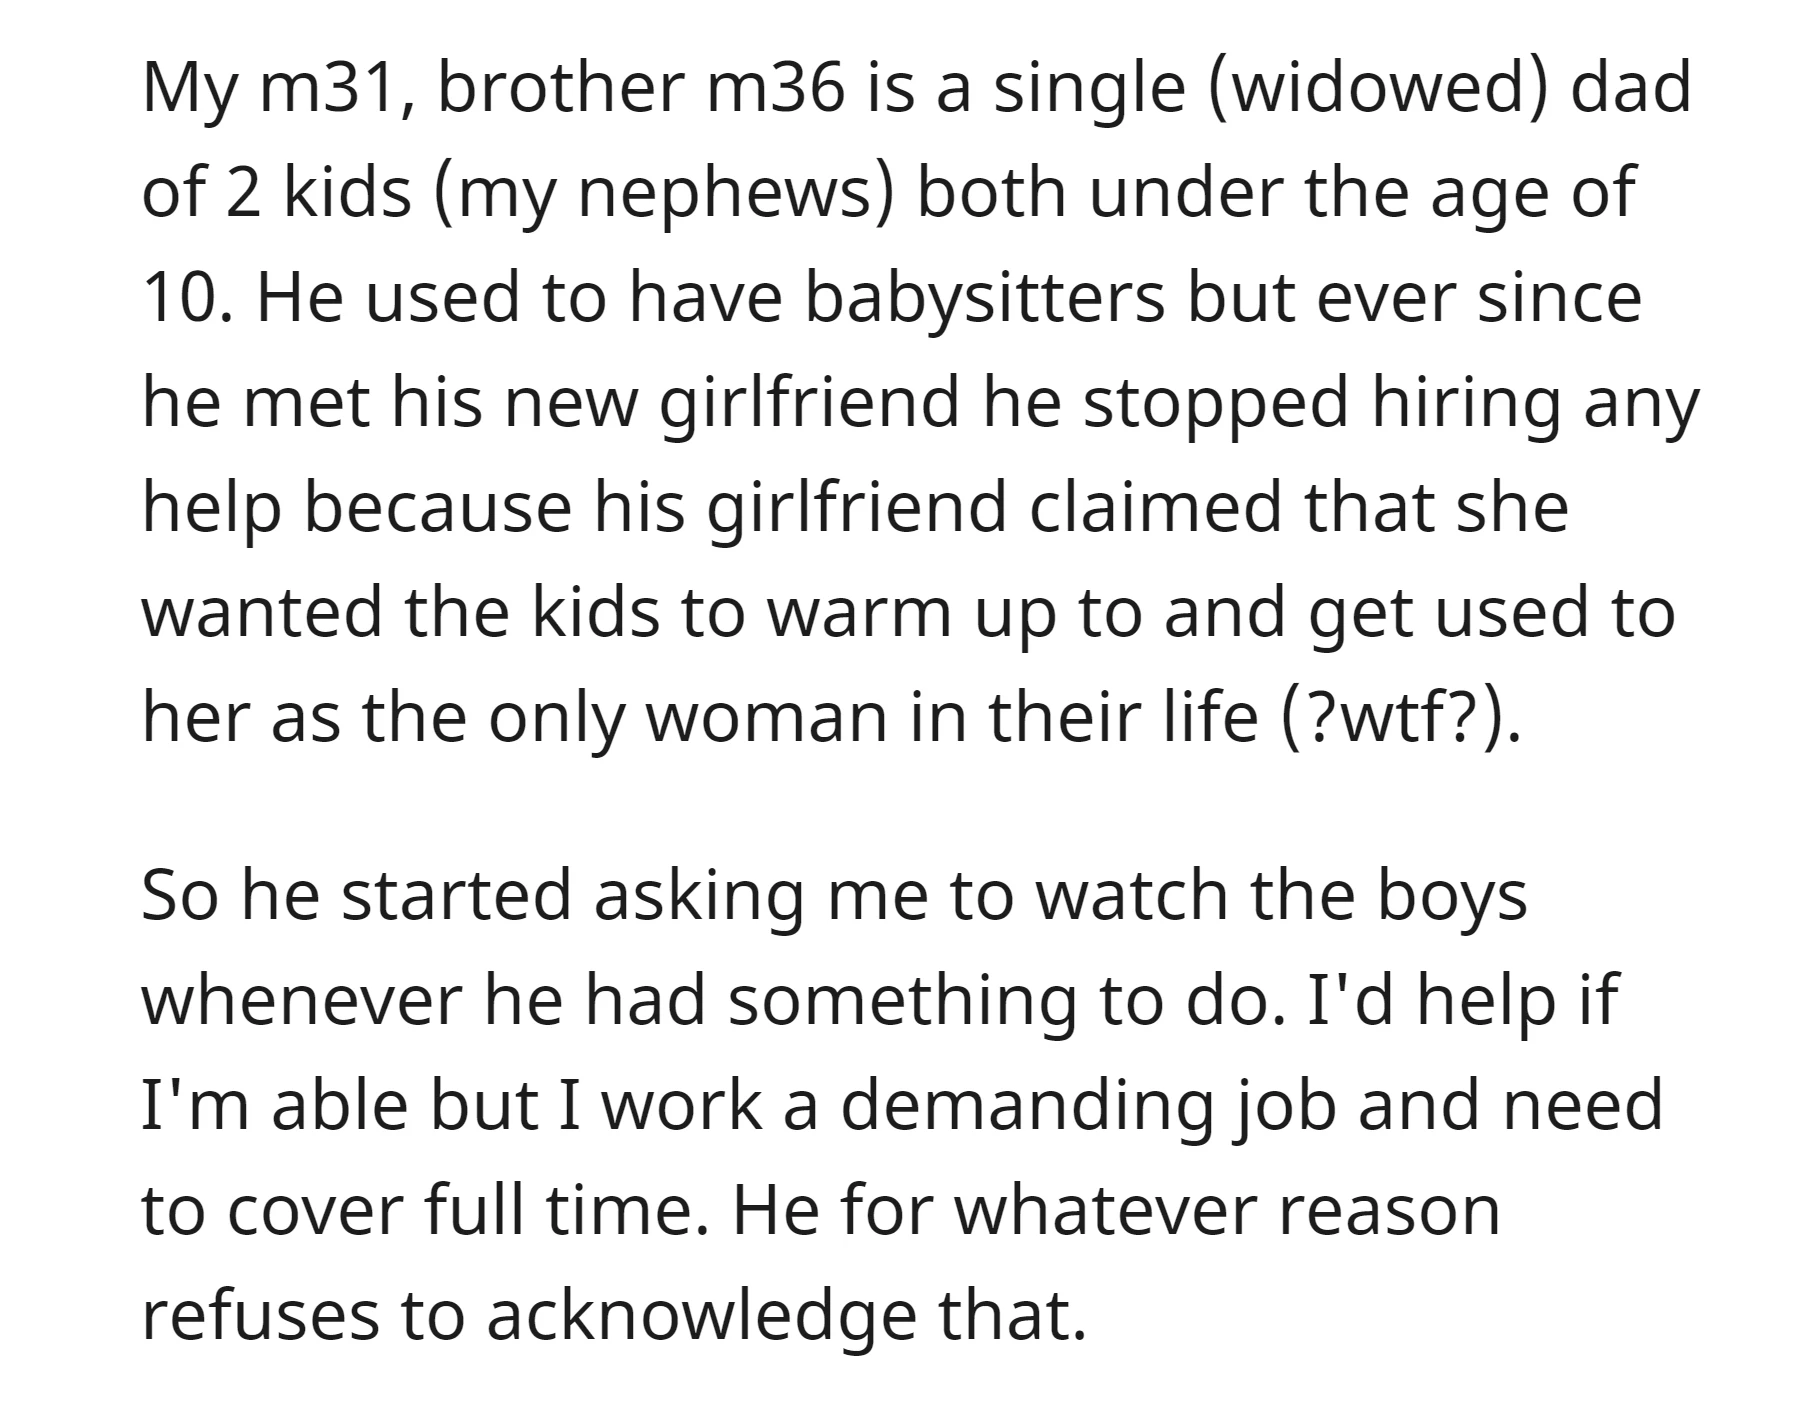 OP's widowed brother stopped hiring babysitters